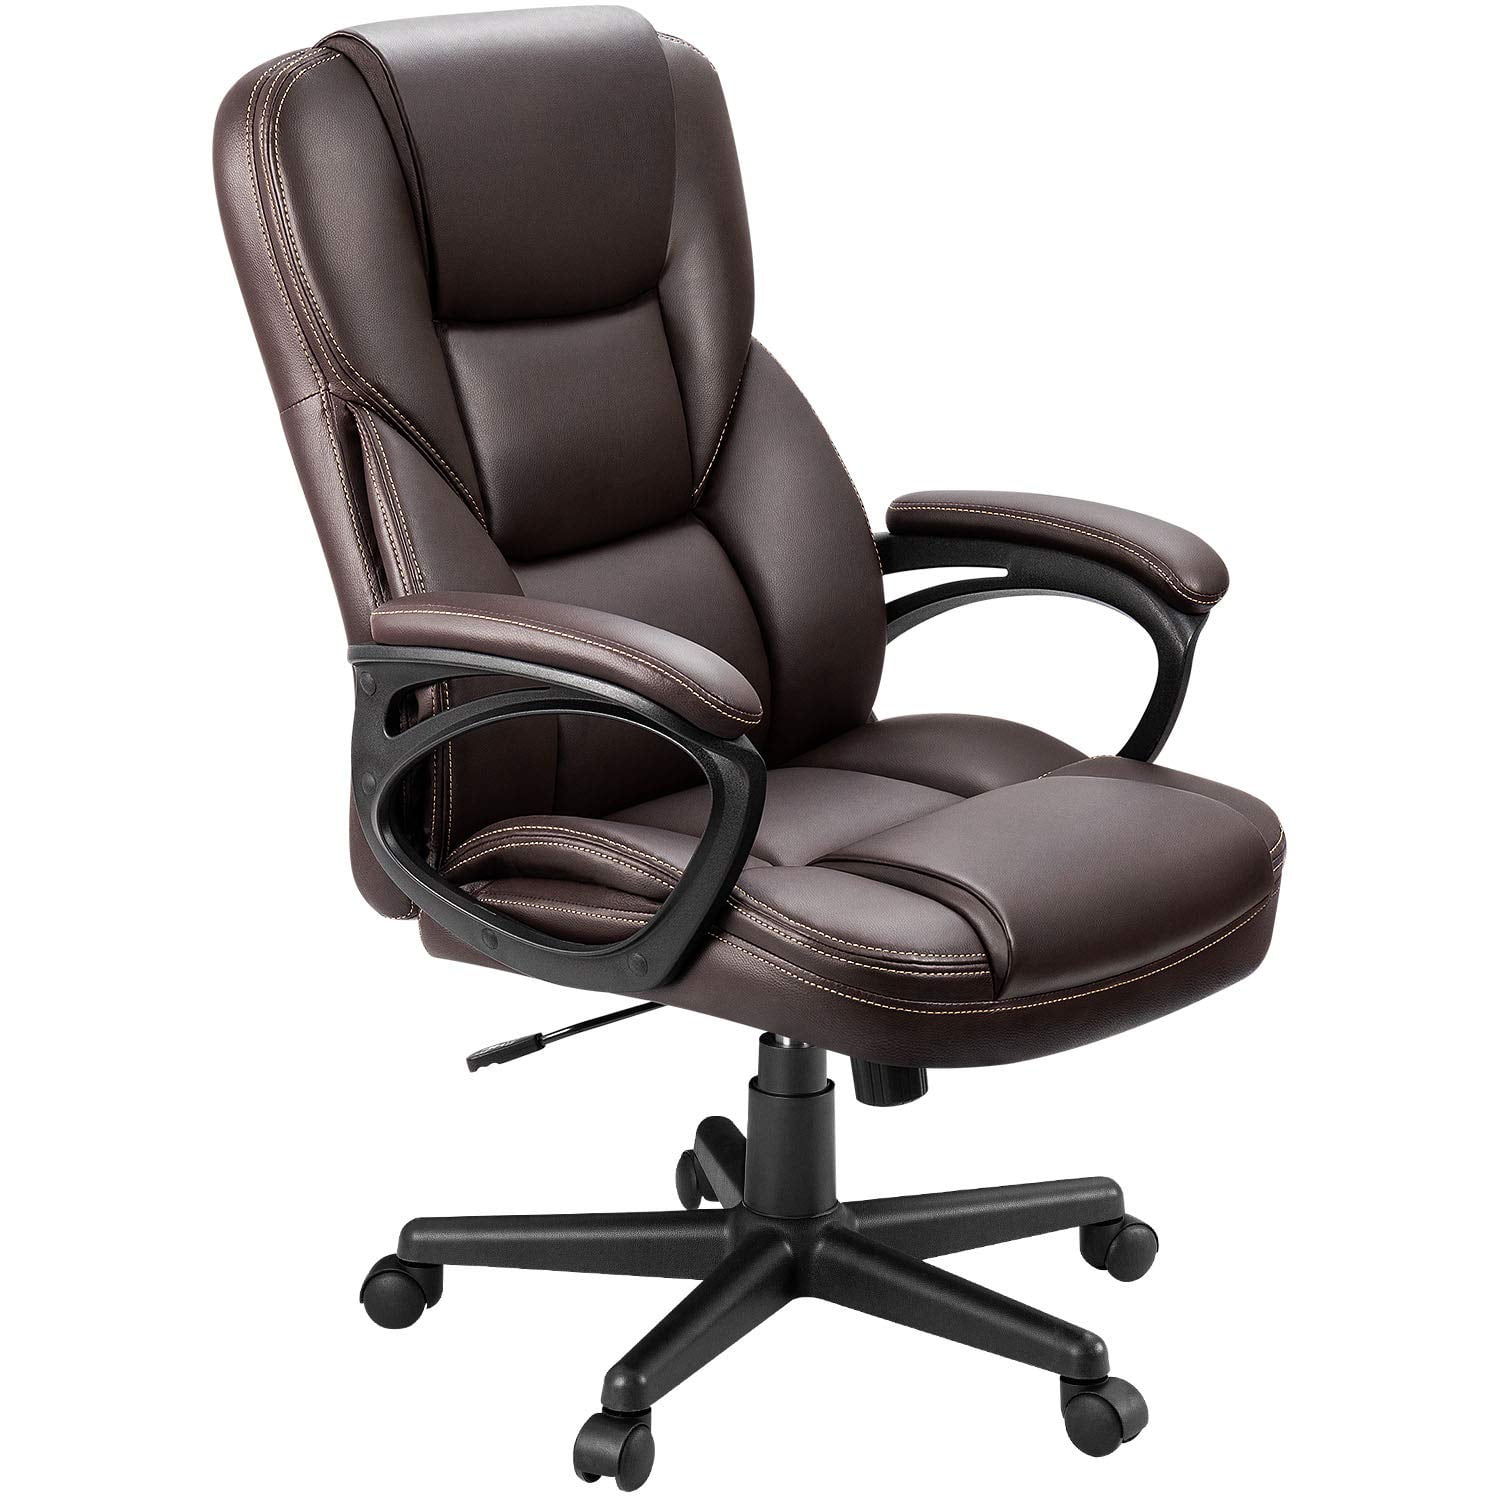 Lacoo Business Office Furniture High Back Exectuive Managerial Deck